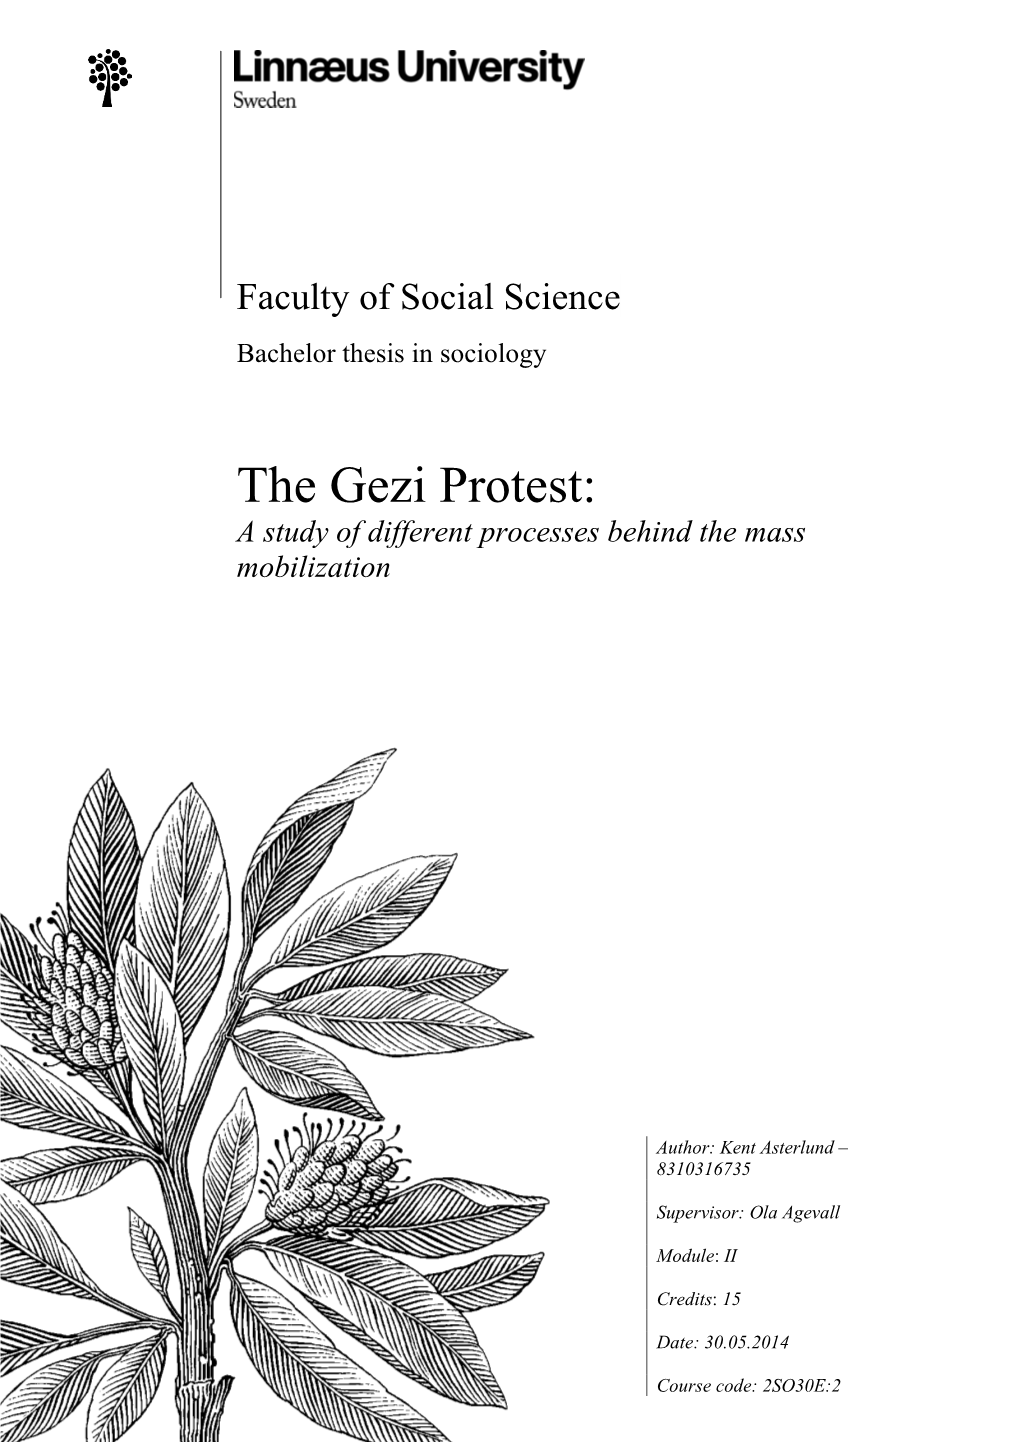 The Gezi Protest: a Study of Different Processes Behind the Mass Mobilization